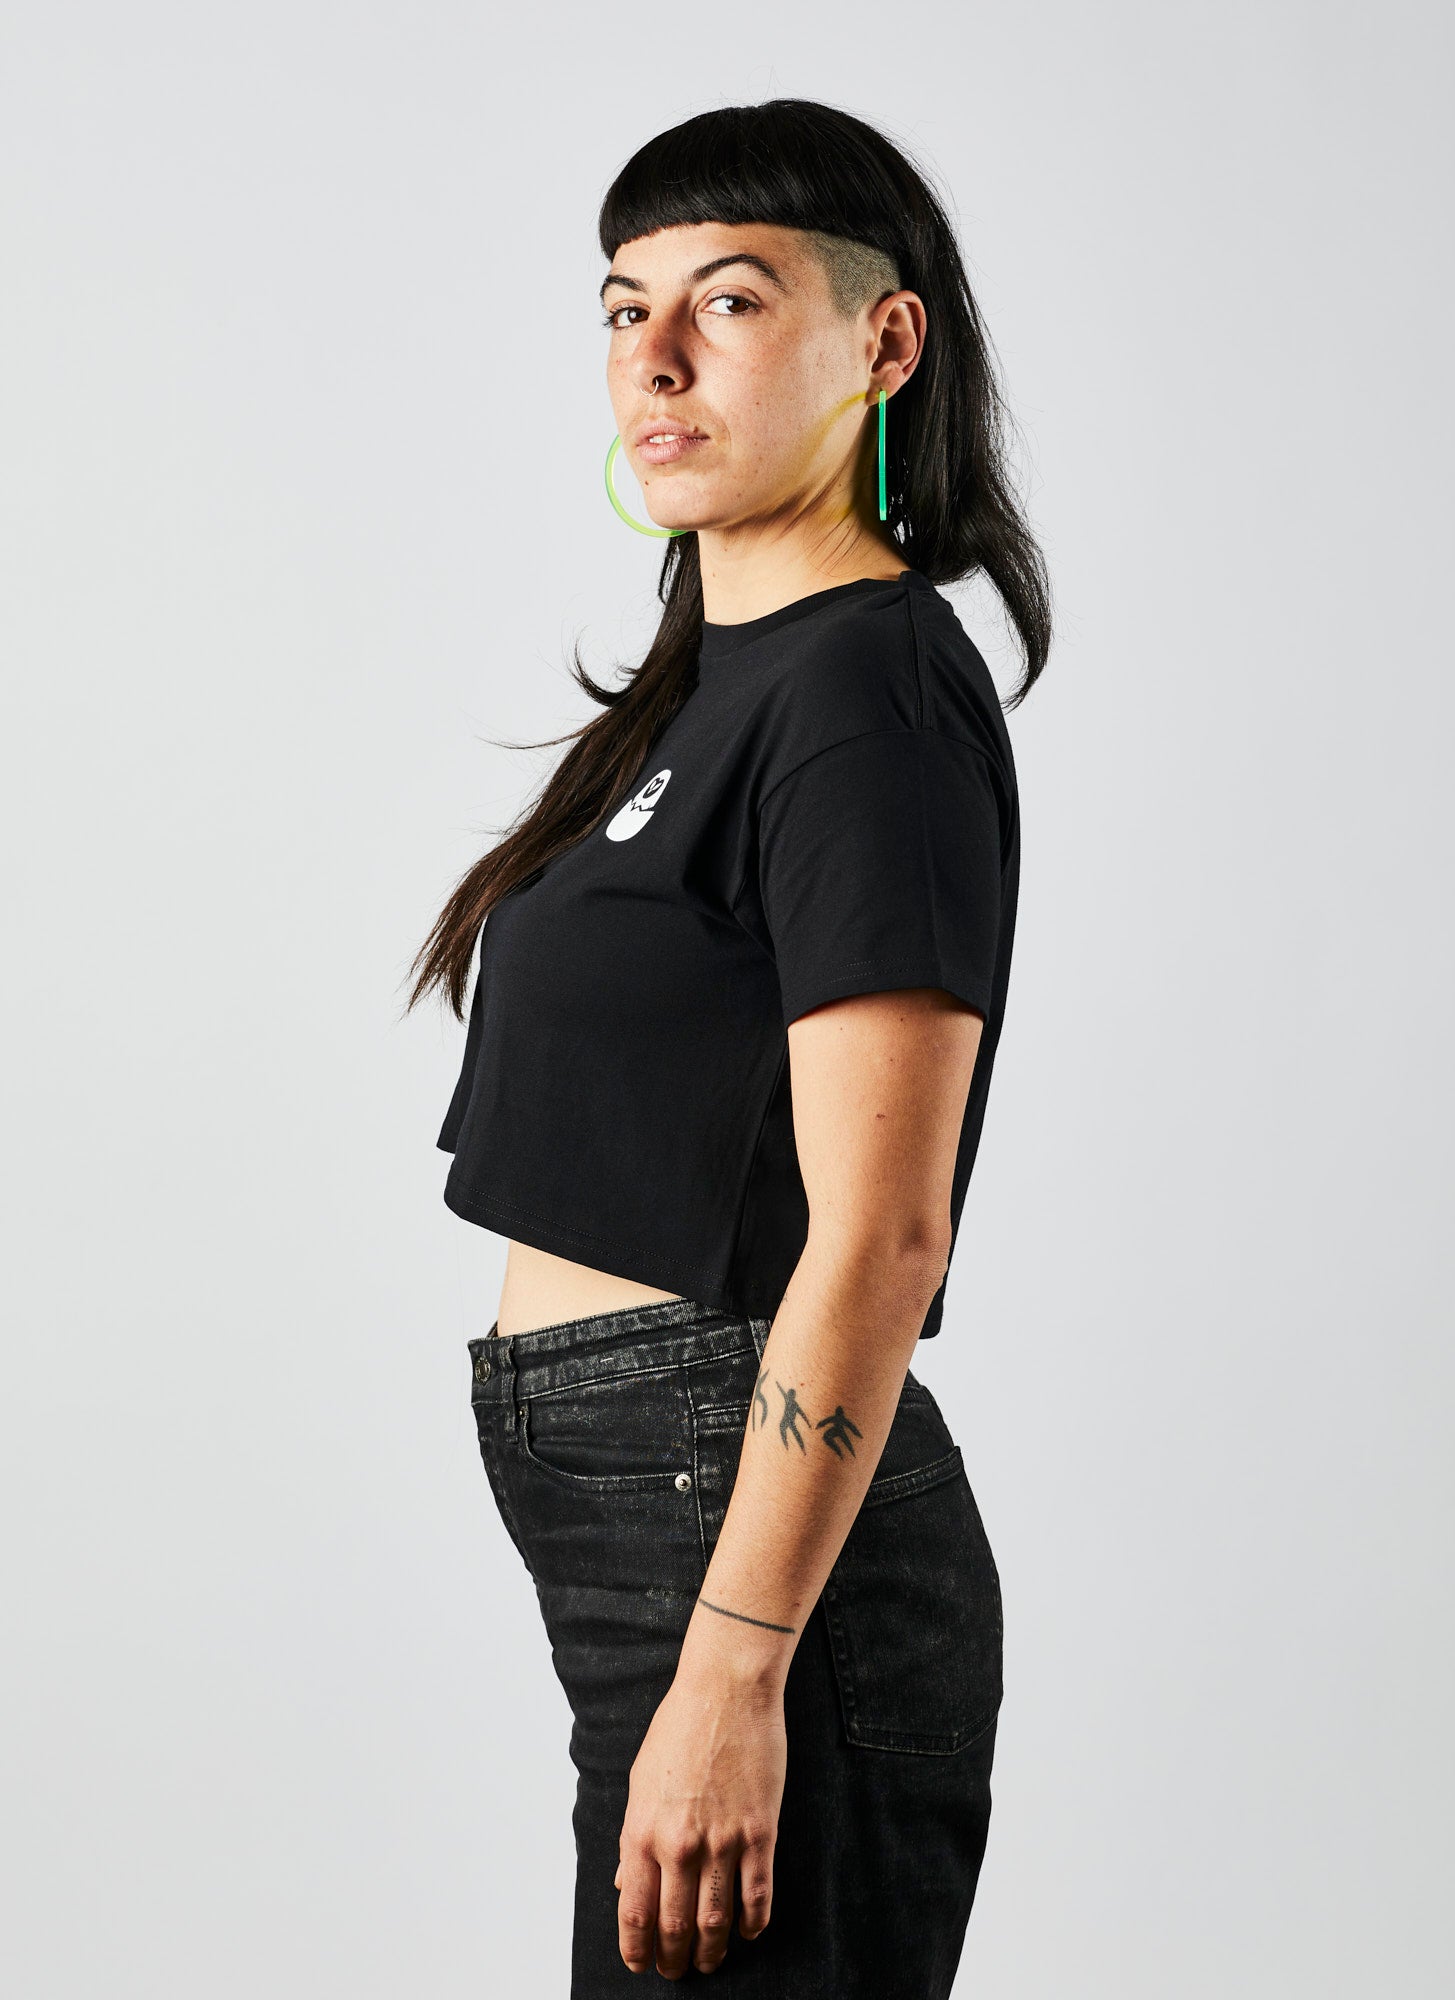 Front angle of a young woman wearing a black, crop Executive Producer shirt from Melbourne video production company, Enamoured Iris